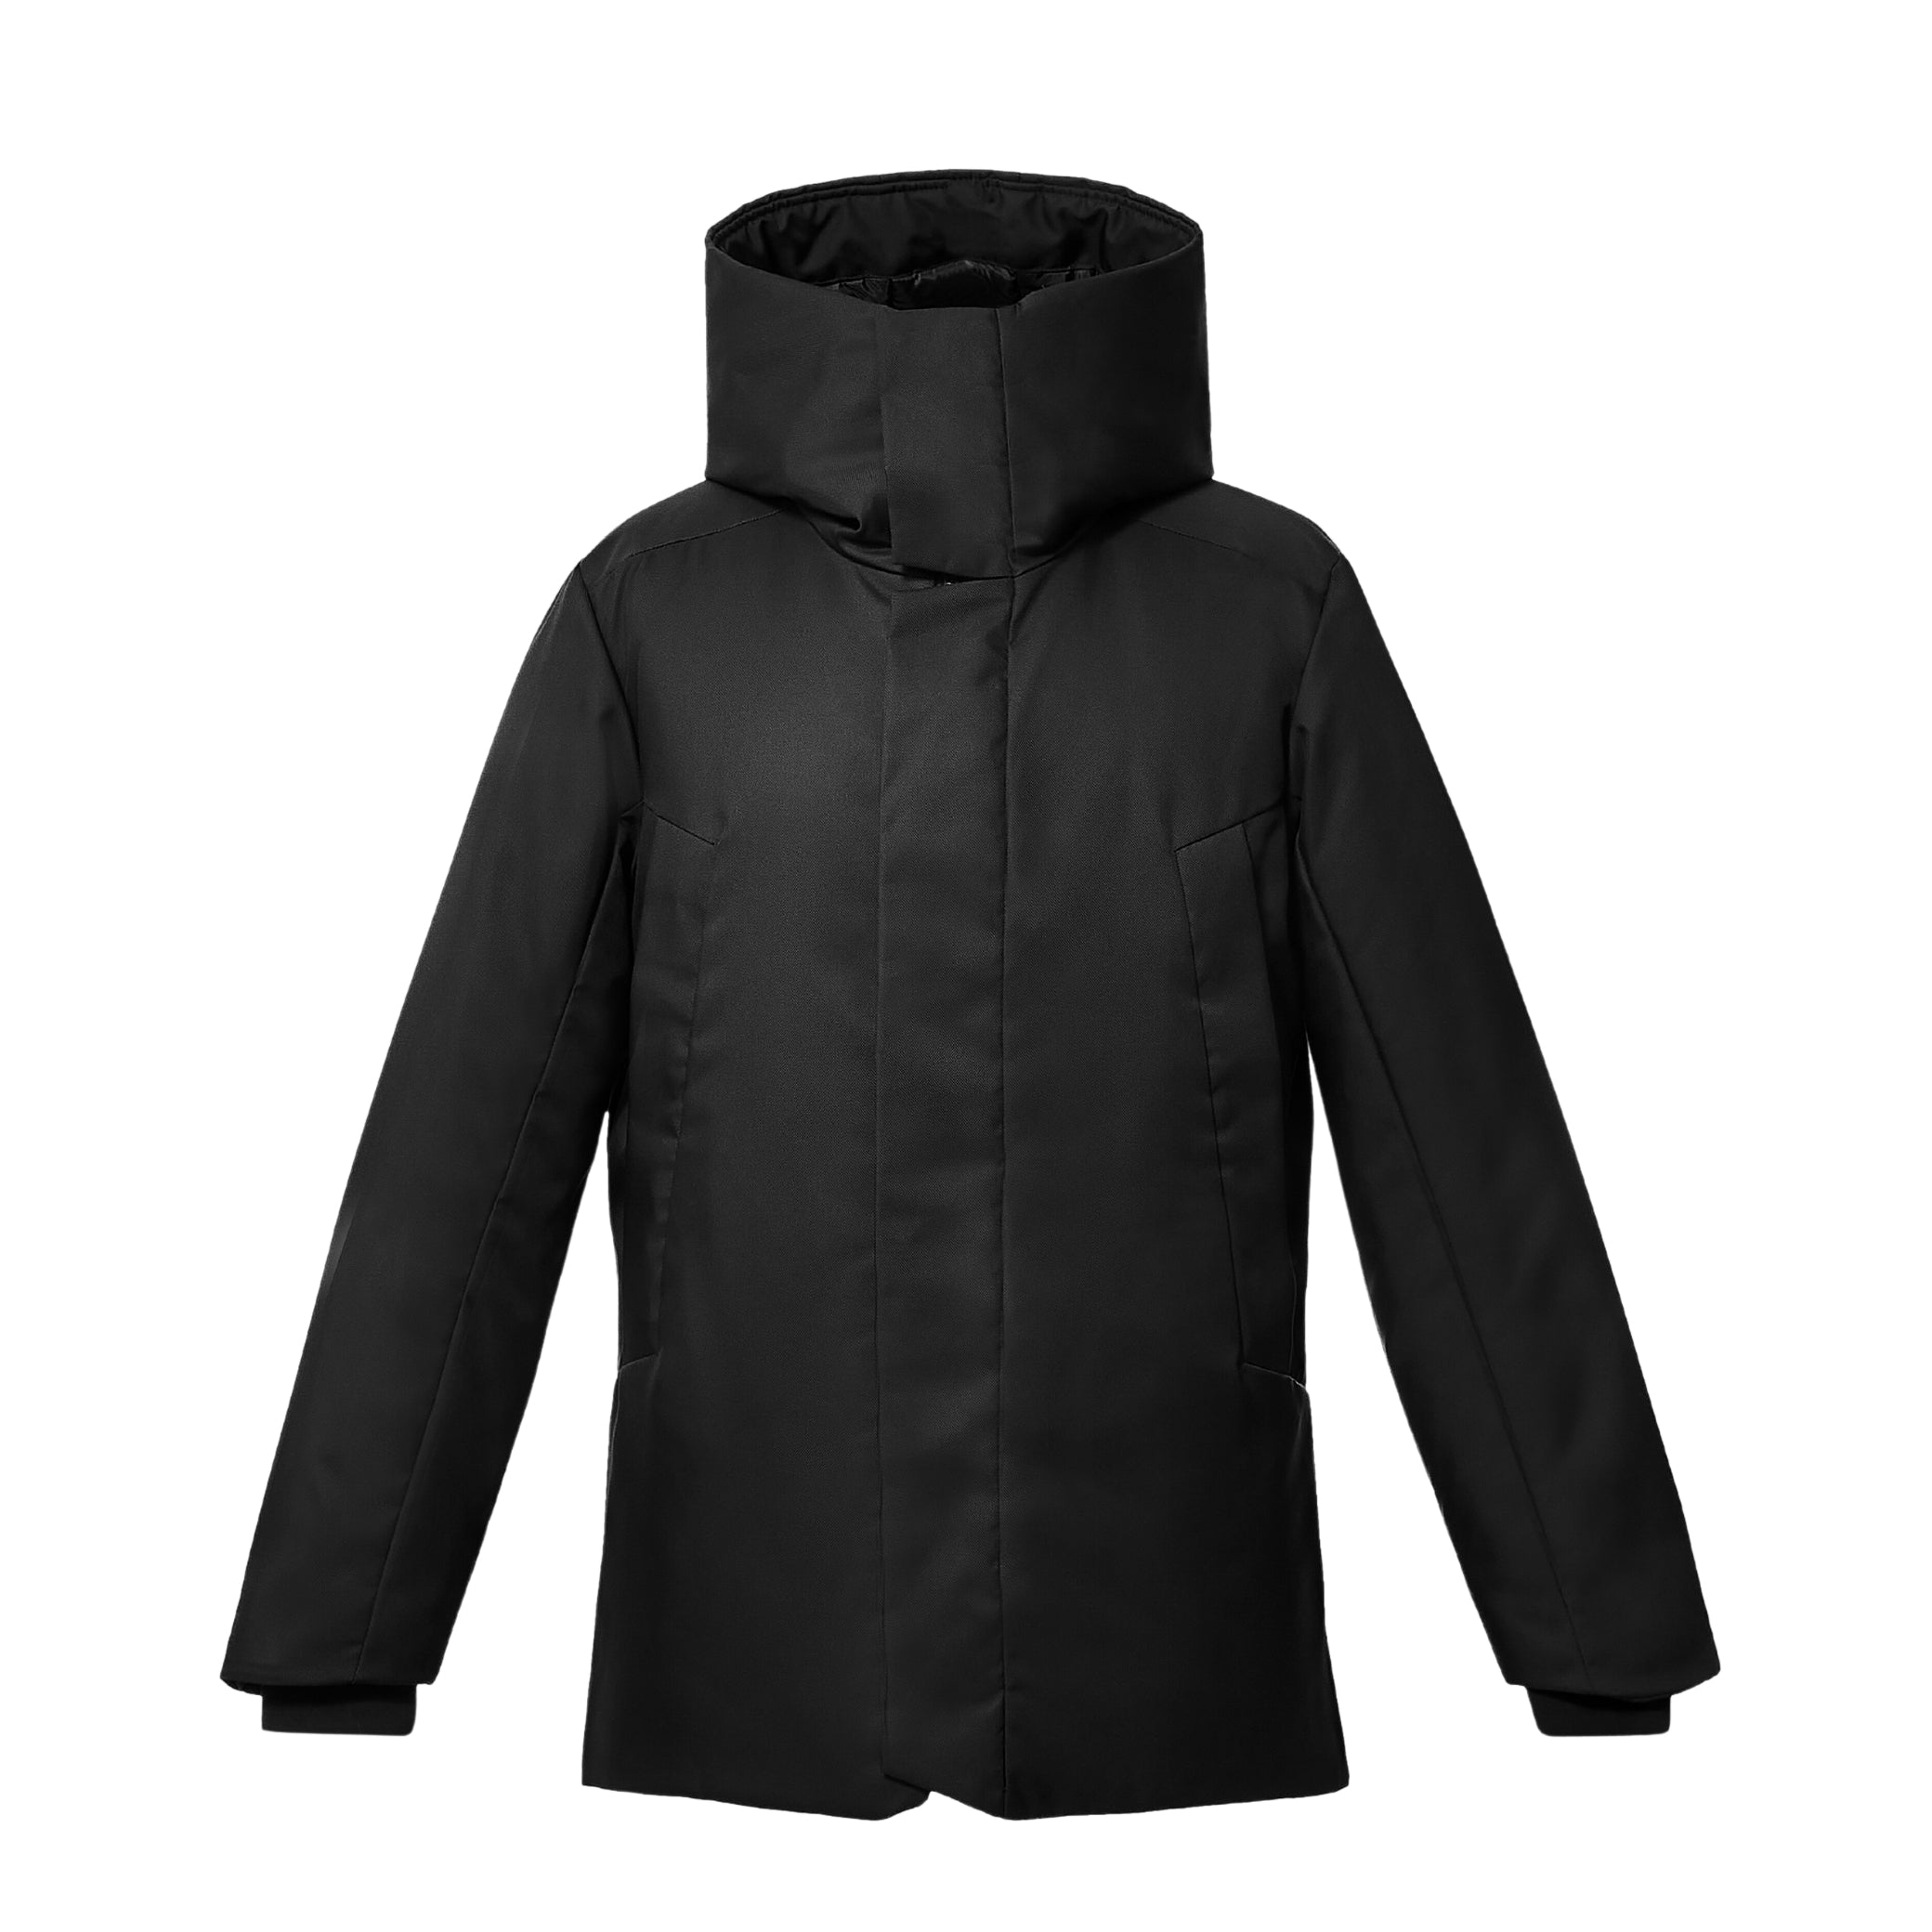 Front view of a forrest Bedi' "second life" program Black coat against a white background